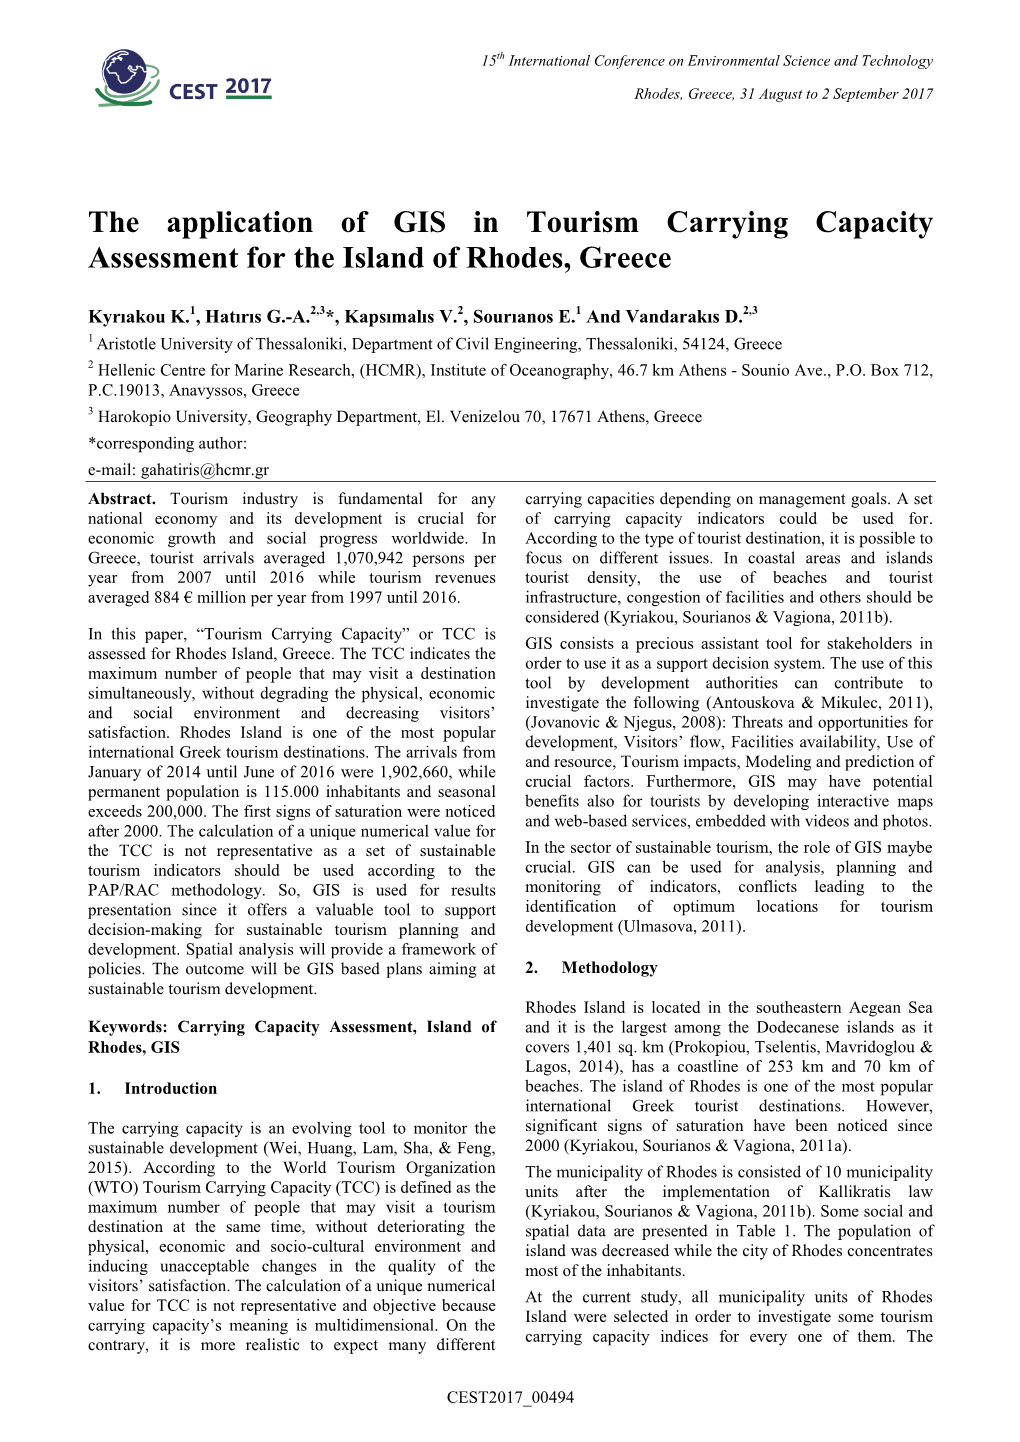 The Application of GIS in Tourism Carrying Capacity Assessment for the Island of Rhodes, Greece